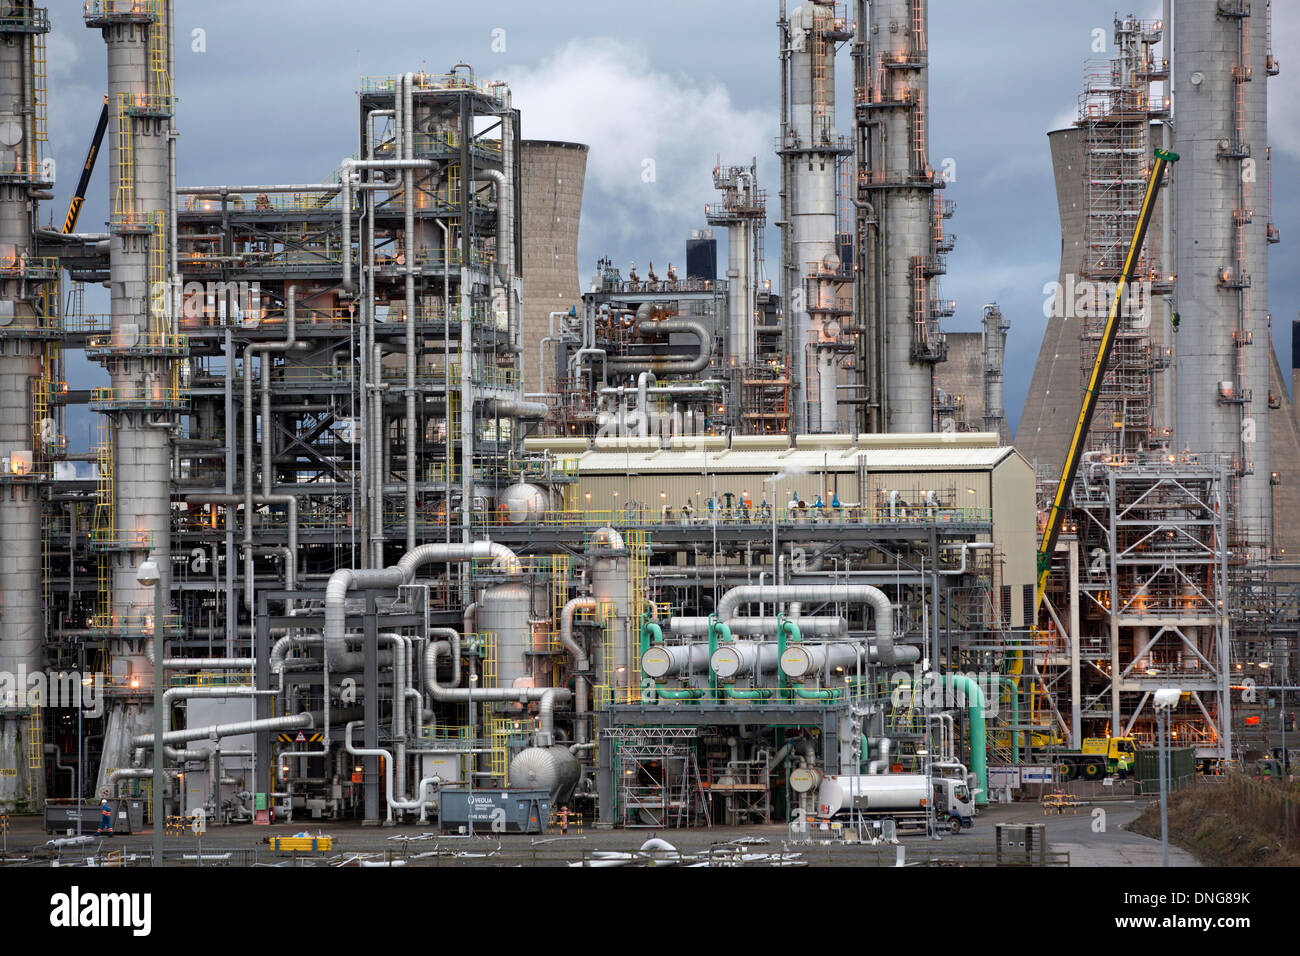 Grangemouth petrochemical plant and home to Scotland's oil refinery industry owned by Ineos, United Kingdom. Stock Photo